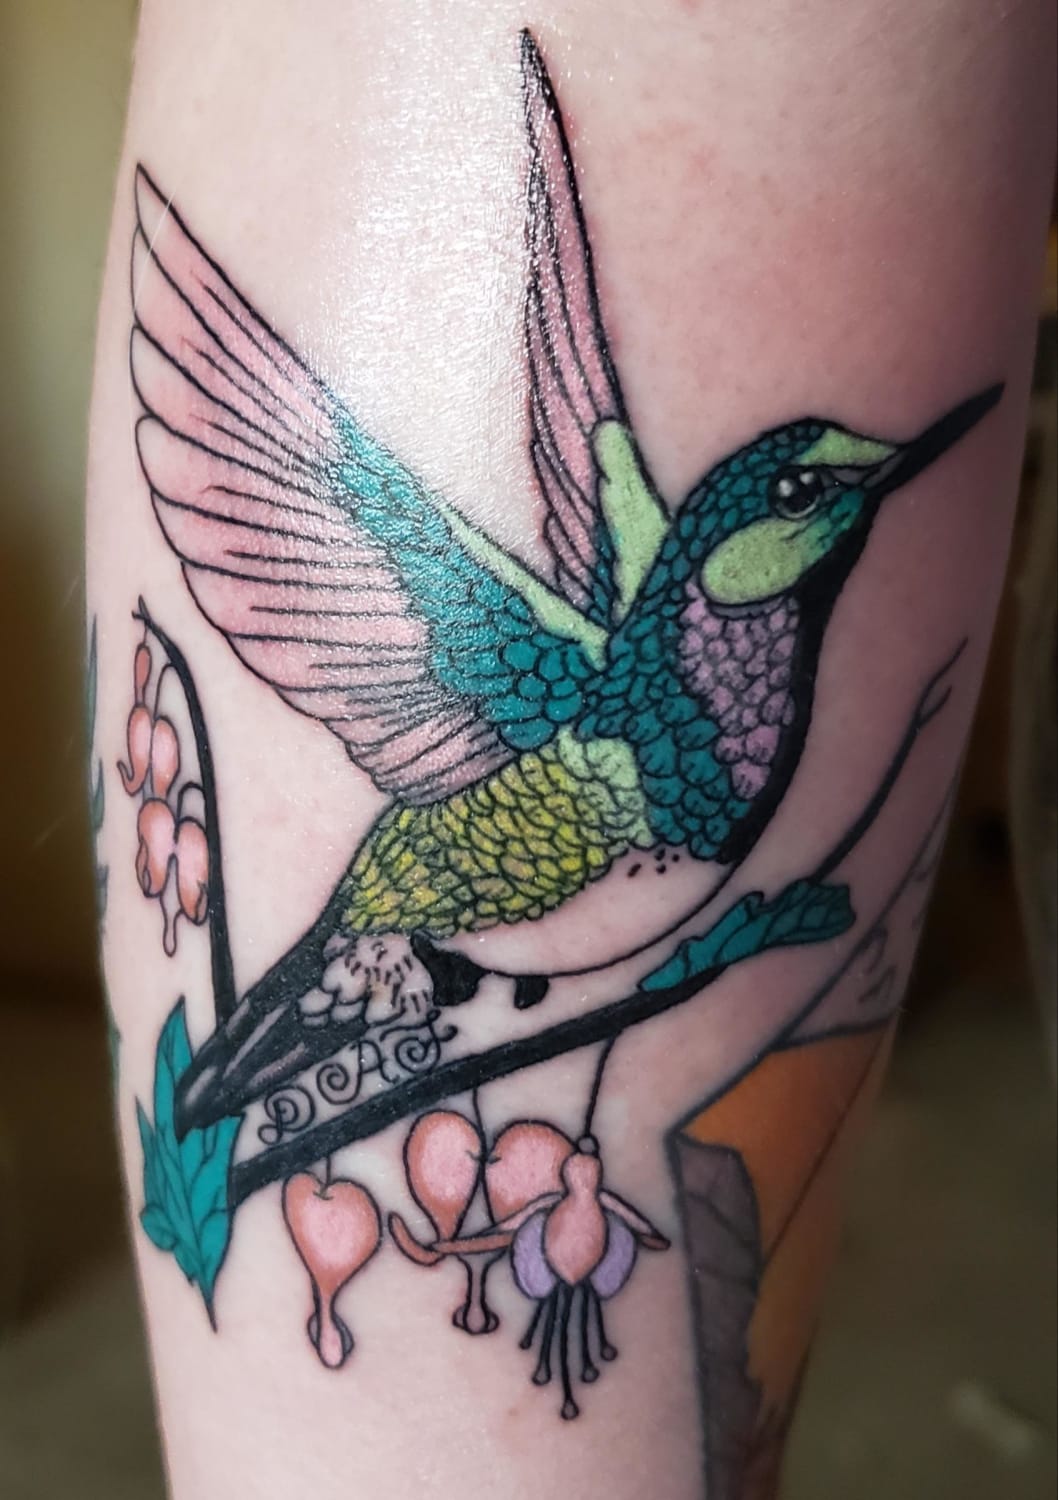 Hummingbird done by Bryce Wilborn at Spark Project Collection in Tucson, AZ